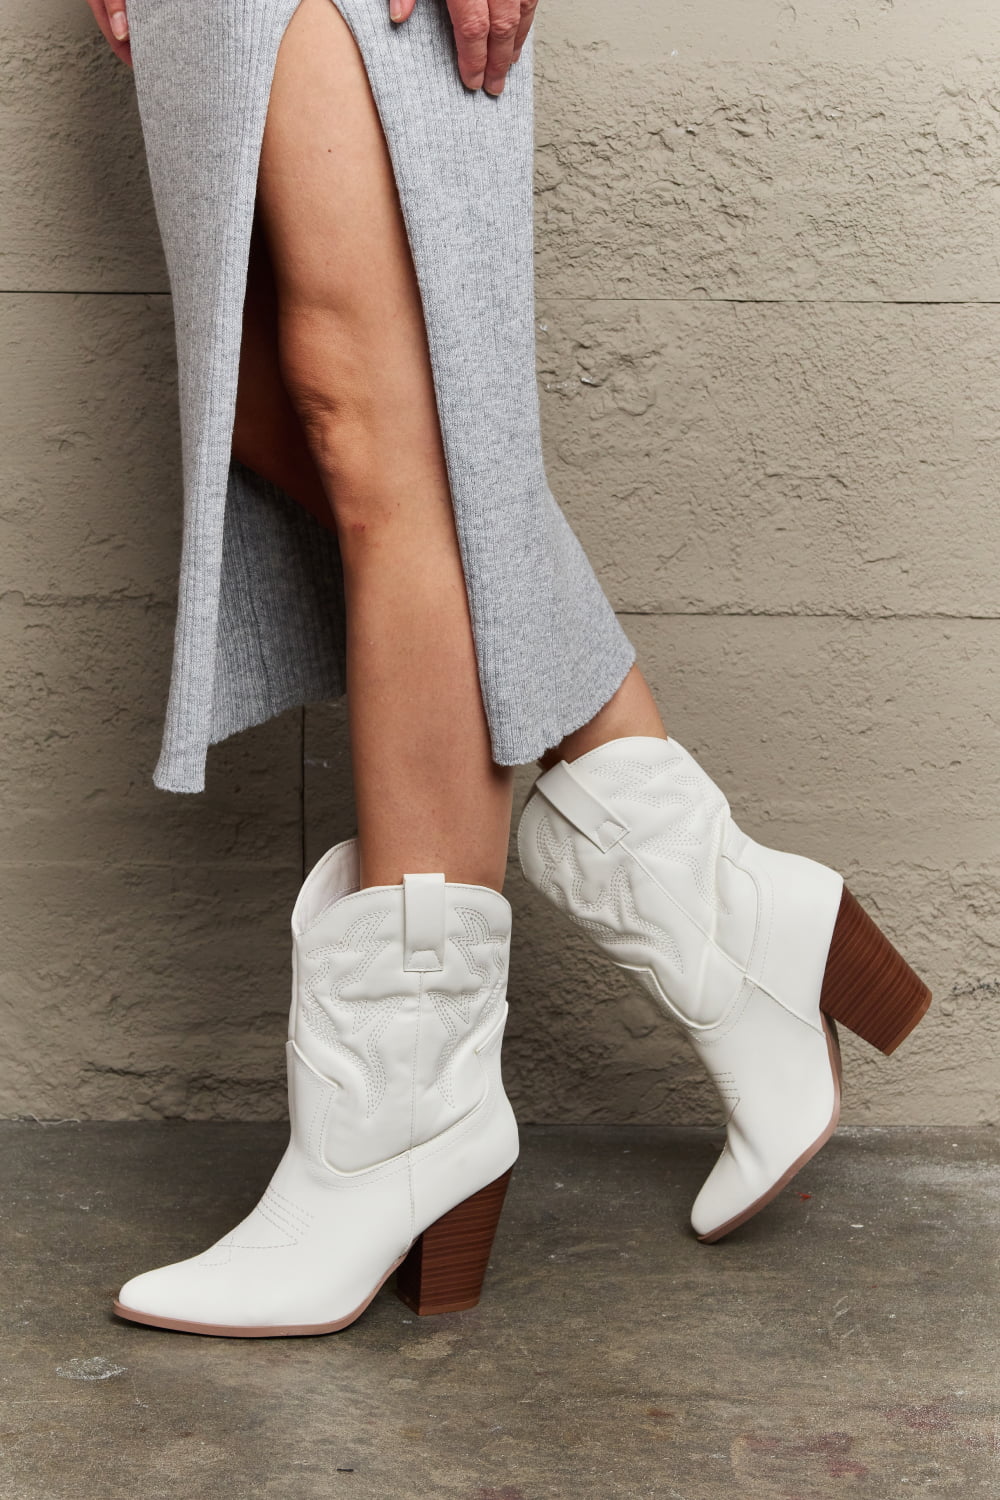 Legend Footwear White Bella Cowboy Low Mid Shin Calf Bootie Cowgirl Boots